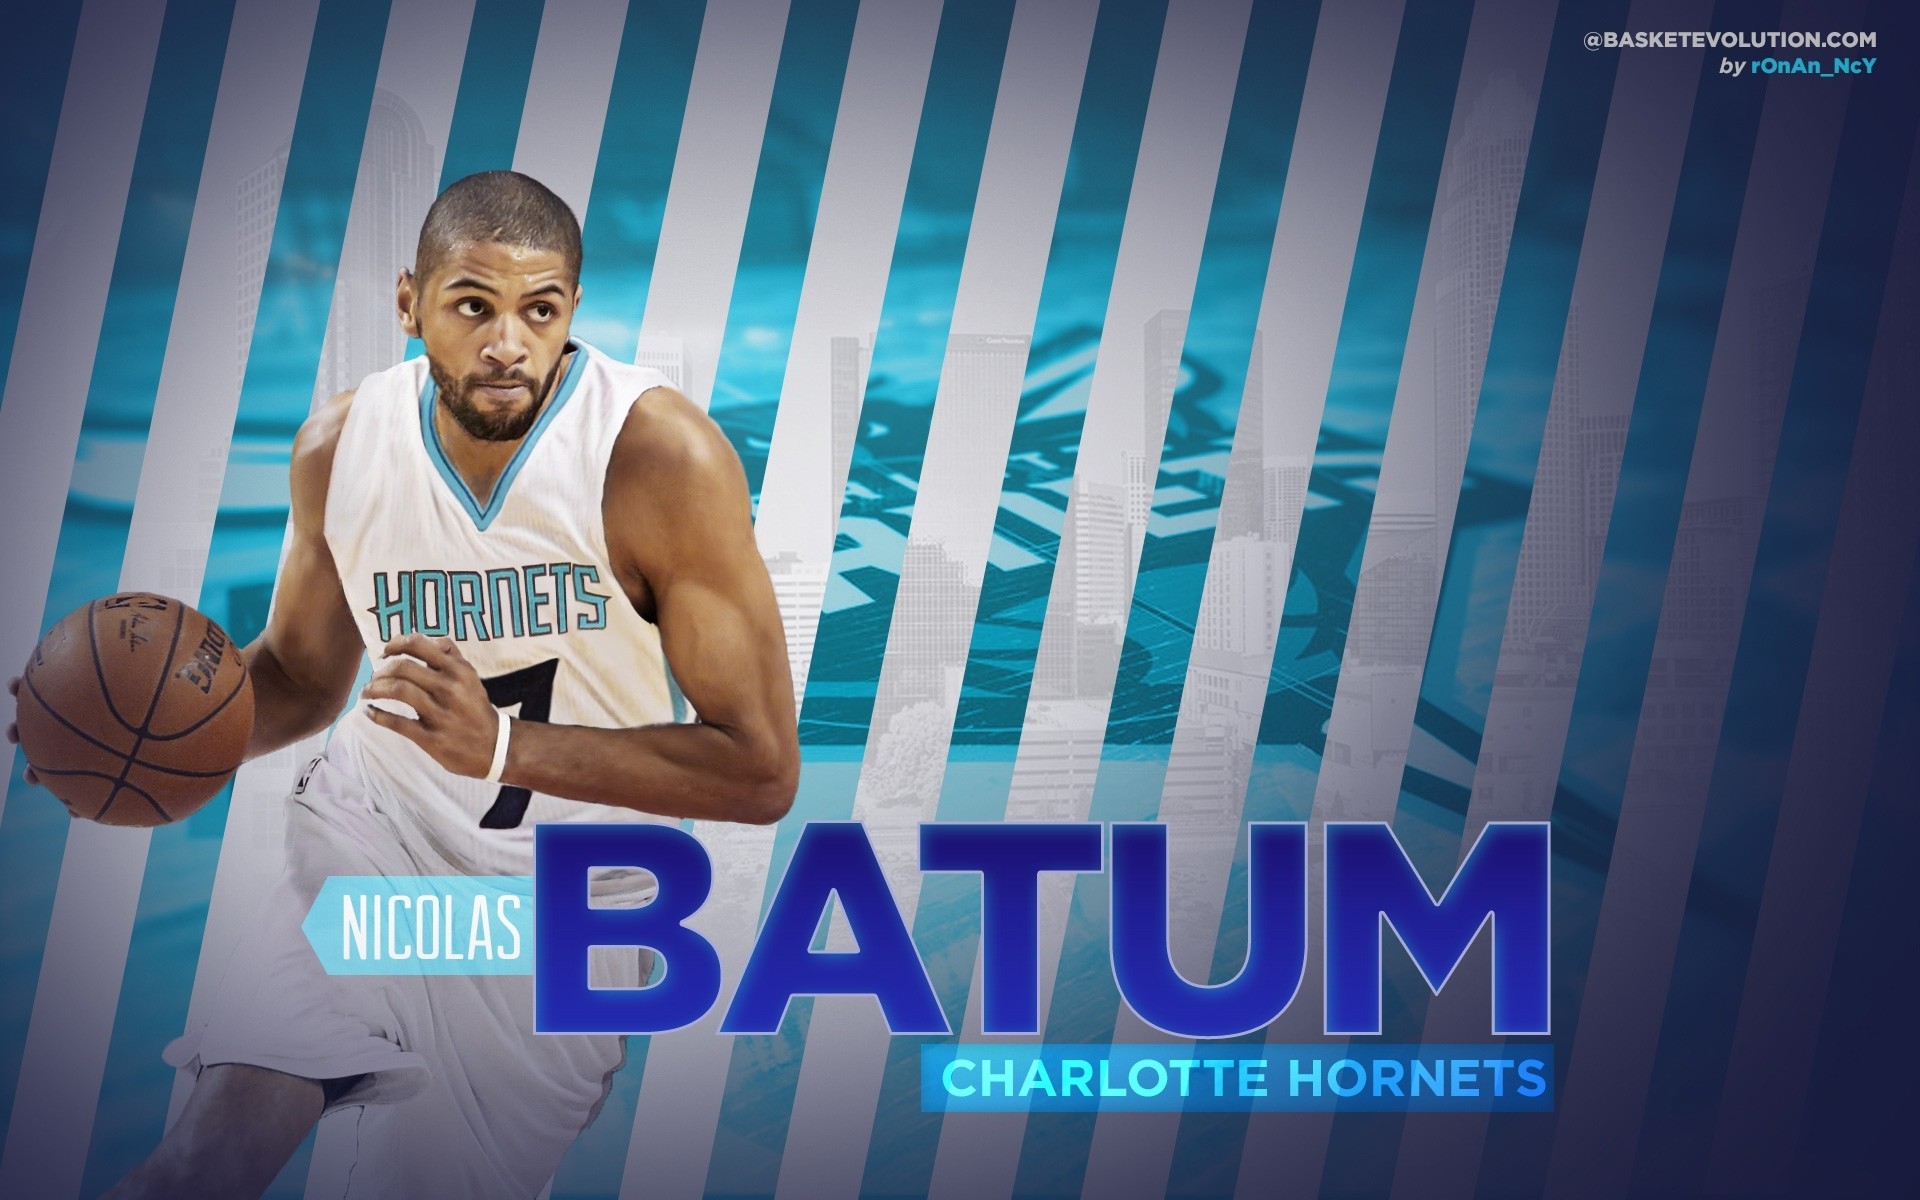 1920x1200 Title : charlotte hornets wallpapers | basketball wallpapers at. Dimension  : 1920 x 1200. File Type : JPG/JPEG